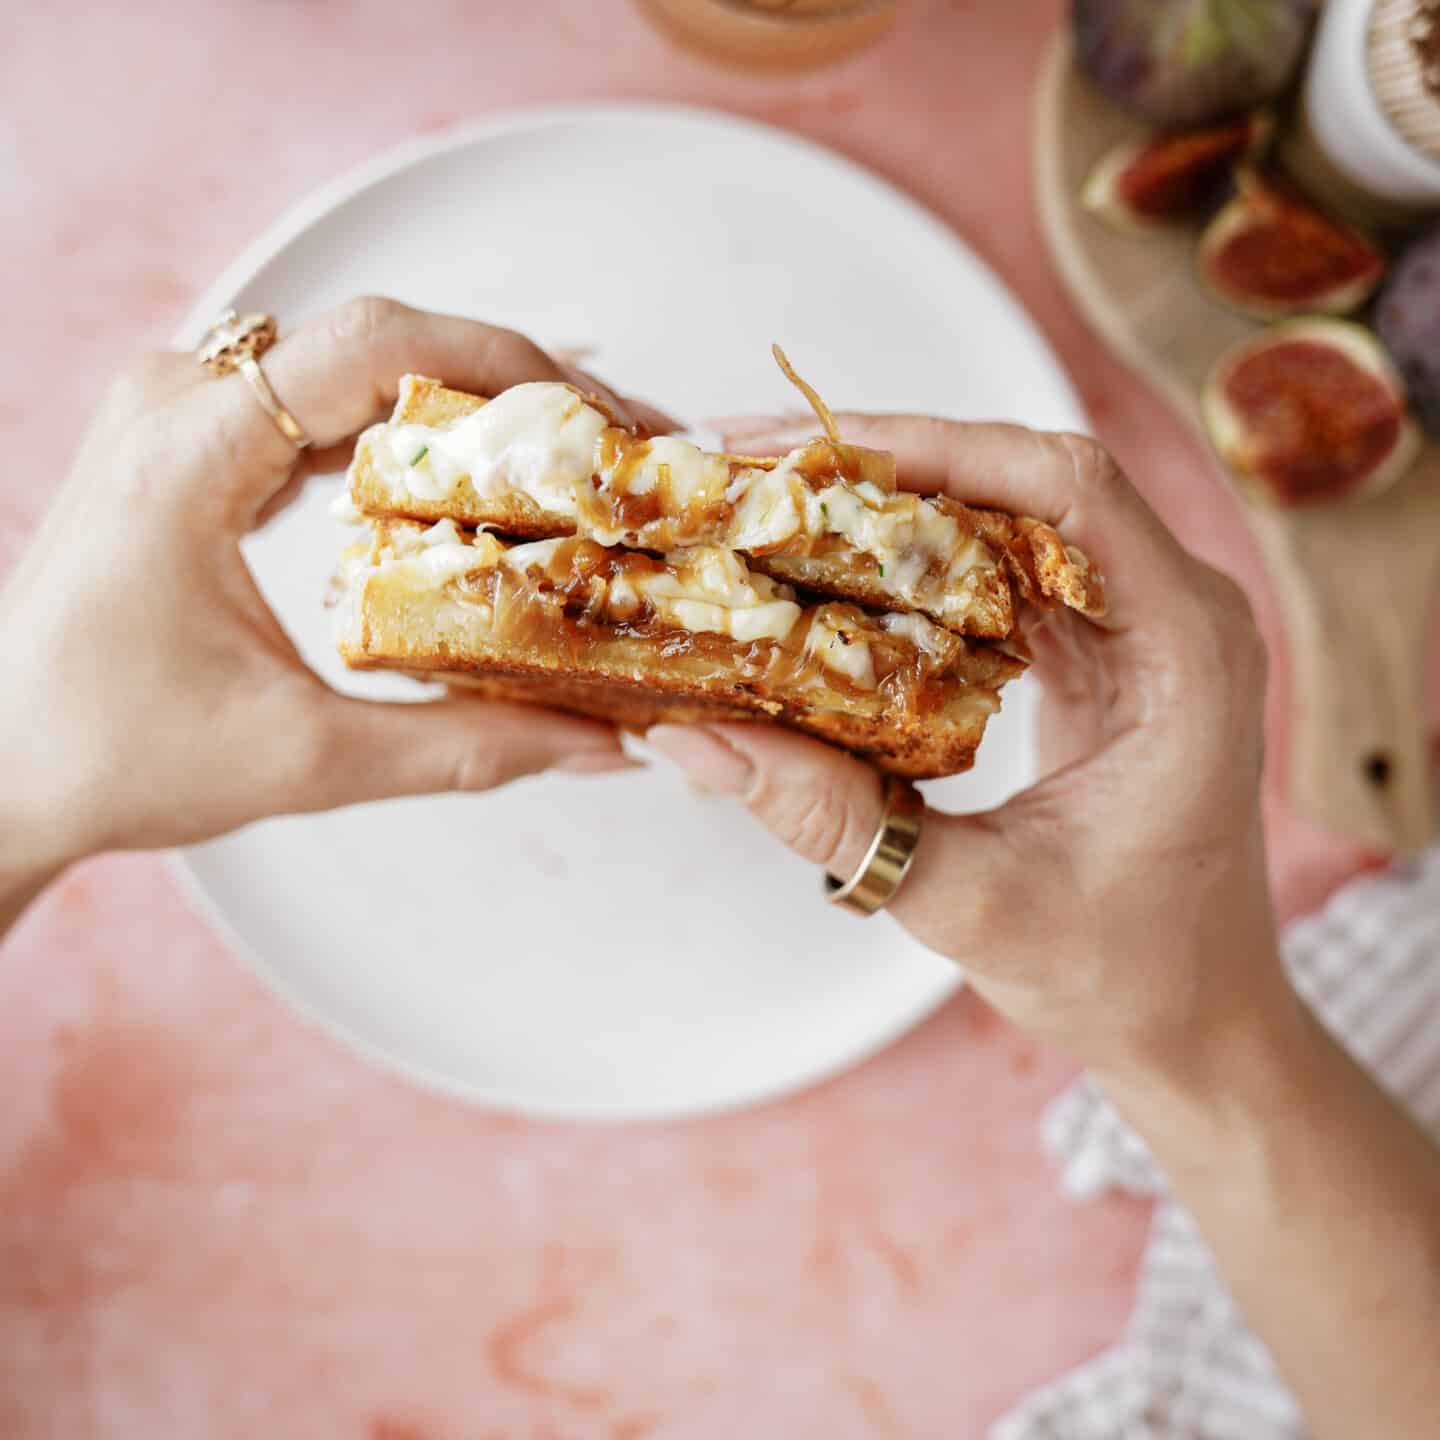 Hands holding a french onion grilled cheese